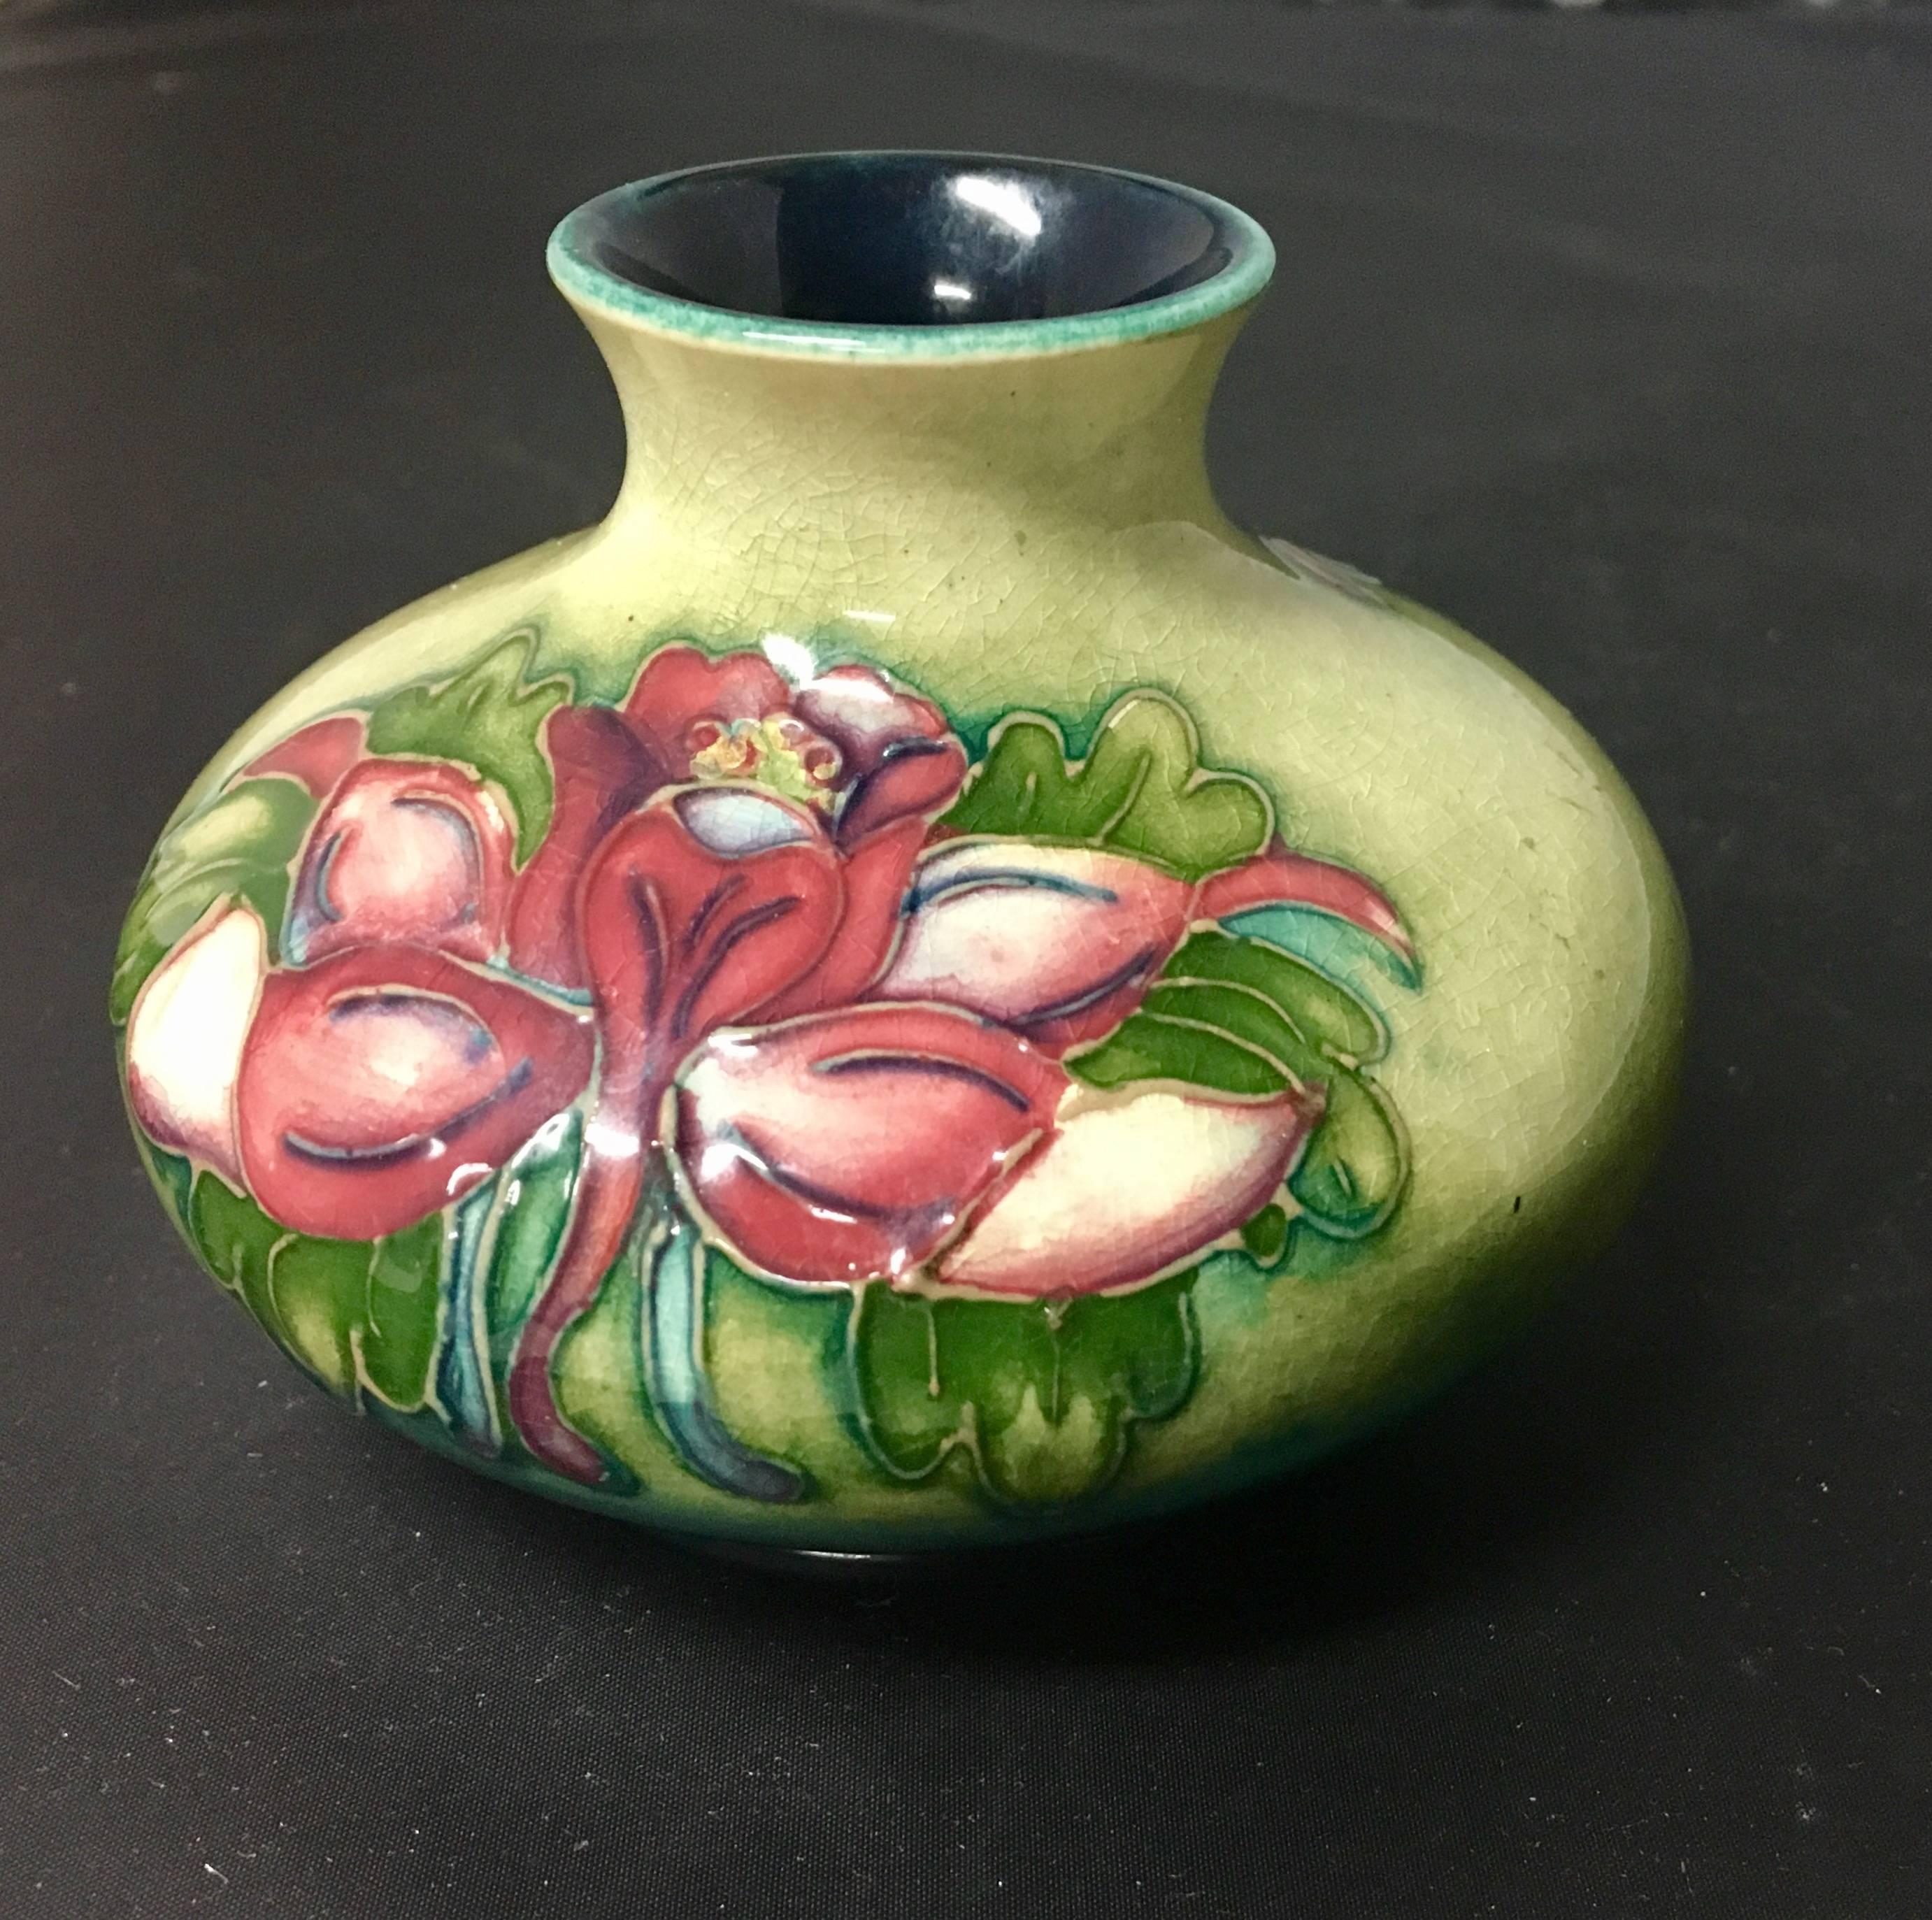 Rare English low art pottery vase by William Moorcraft, circa 1930s. The piece is signed and also has the designation "WM, Potter to HM the Queen". Excellent condition and vibrant floral colors.